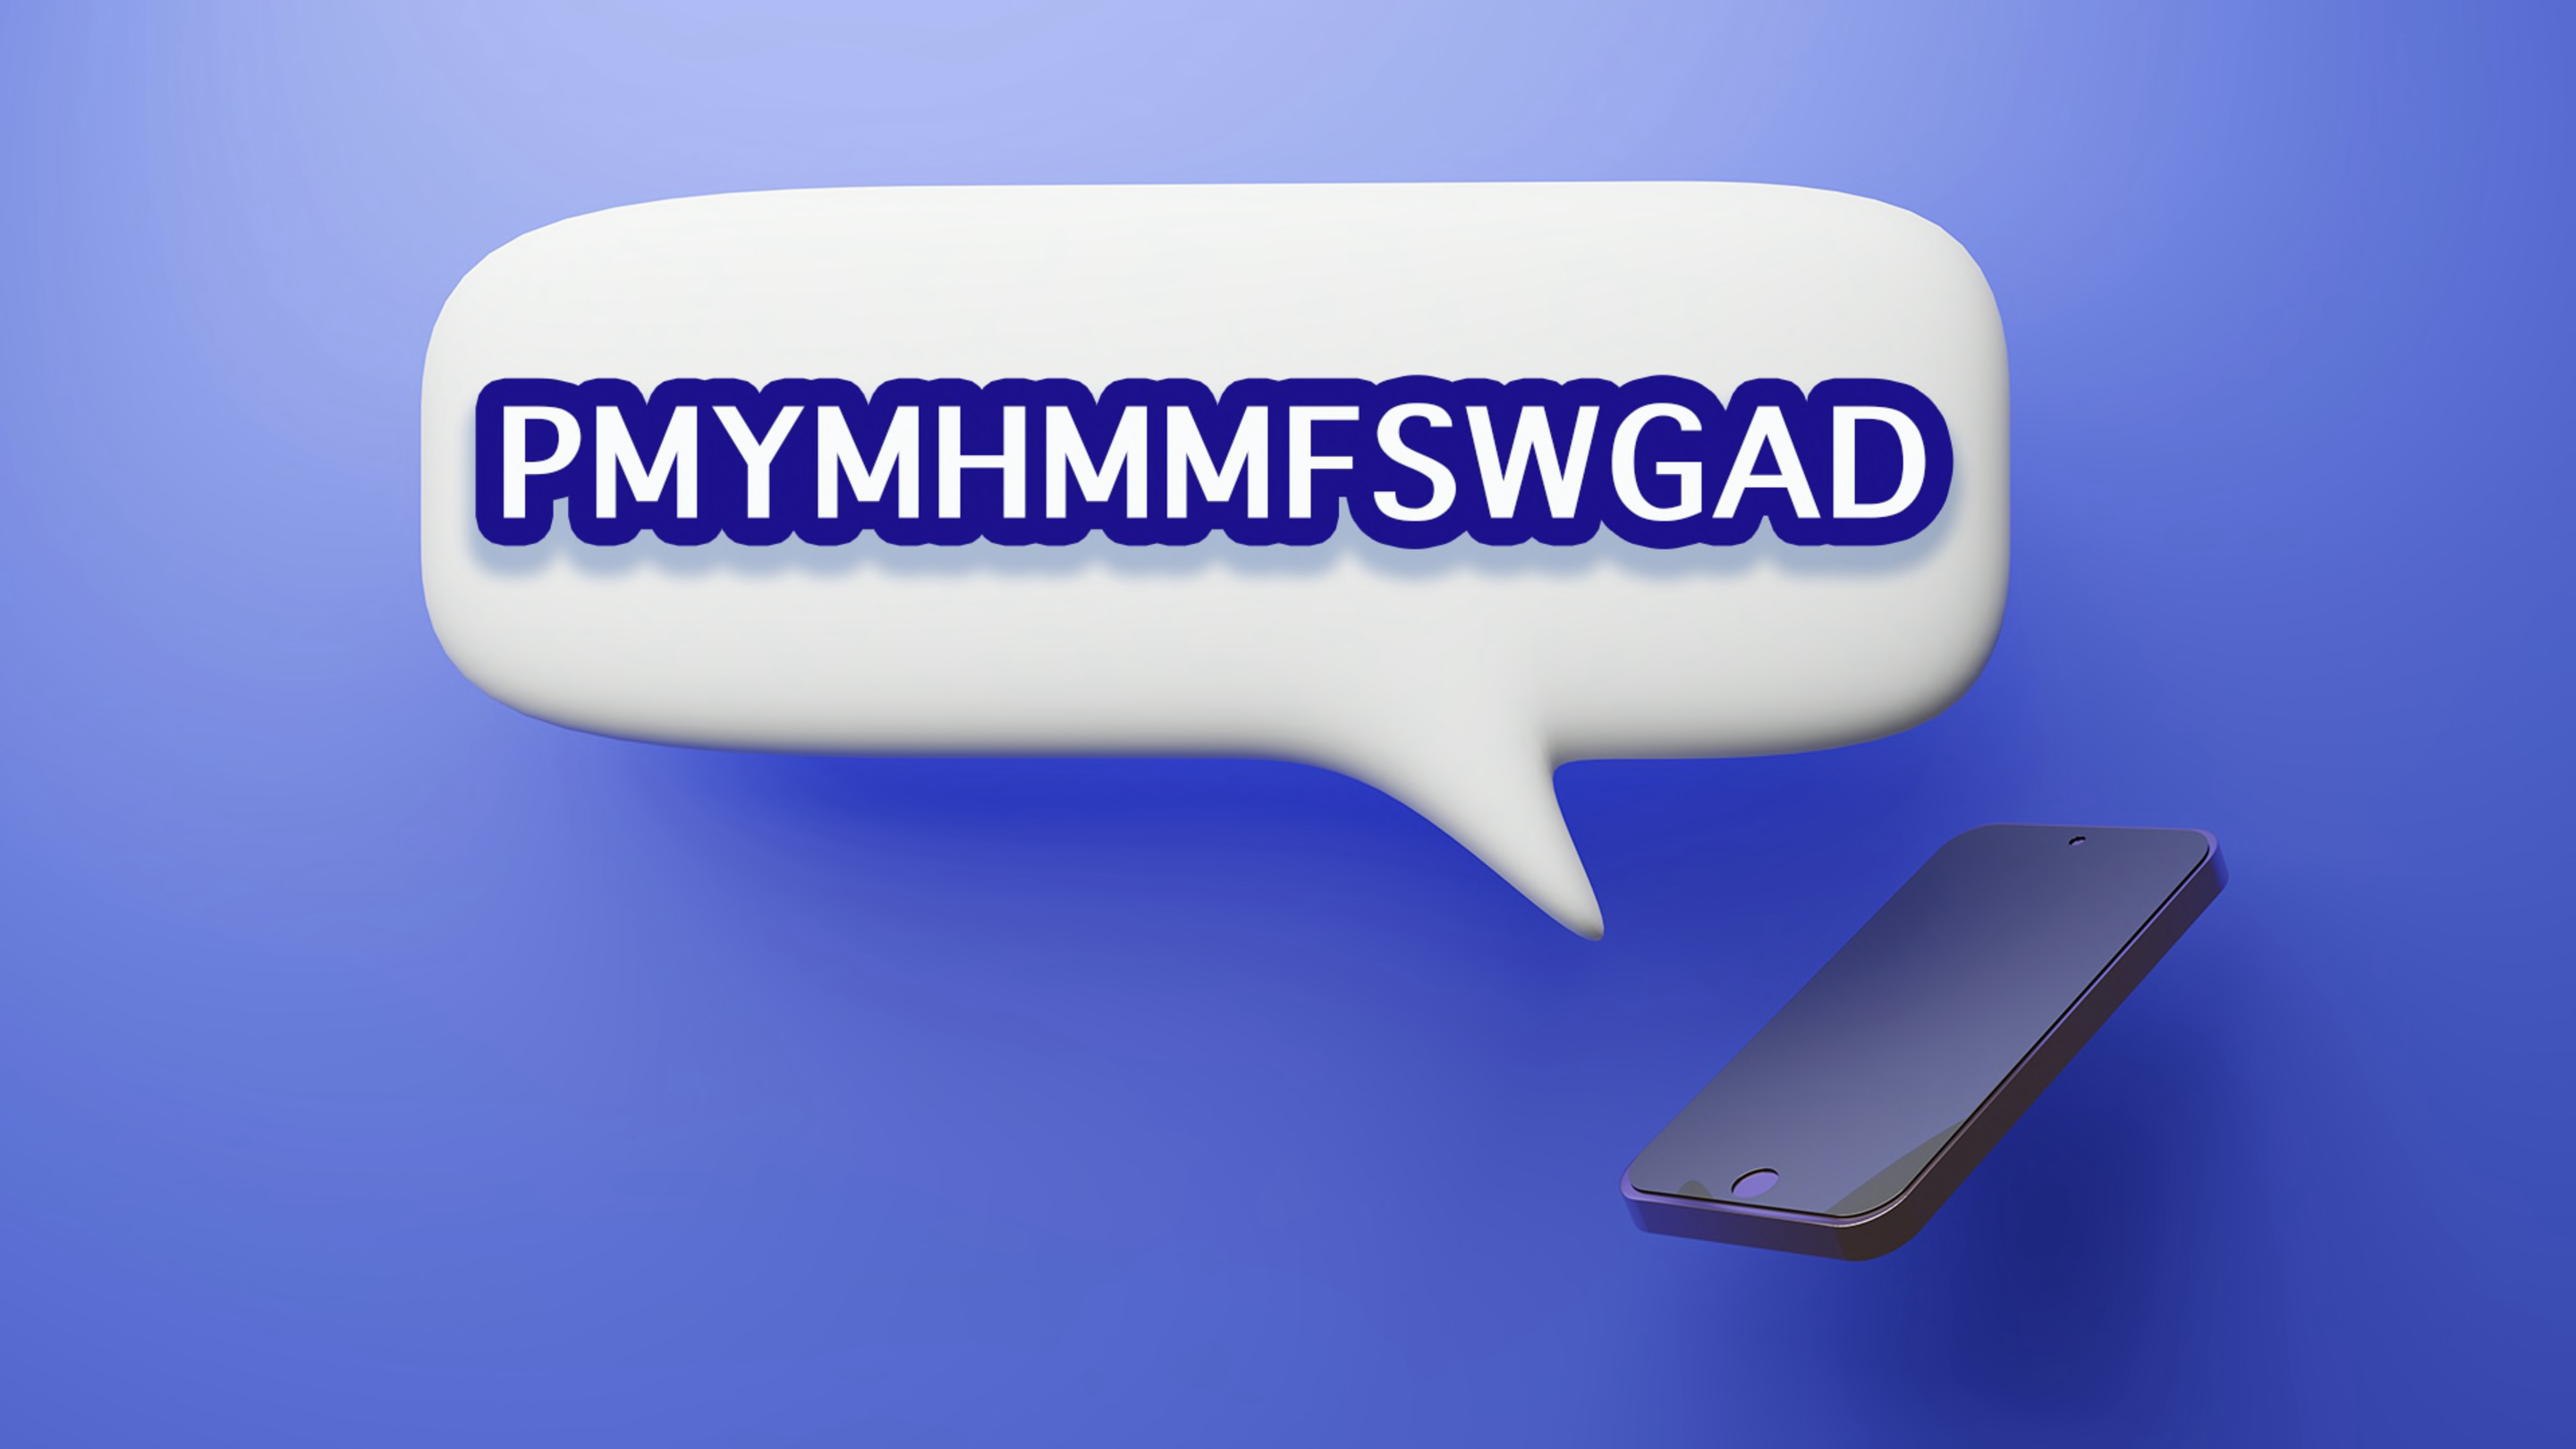 100 WTF Terms From the FBI’s 2014 Internet Slang Dictionary